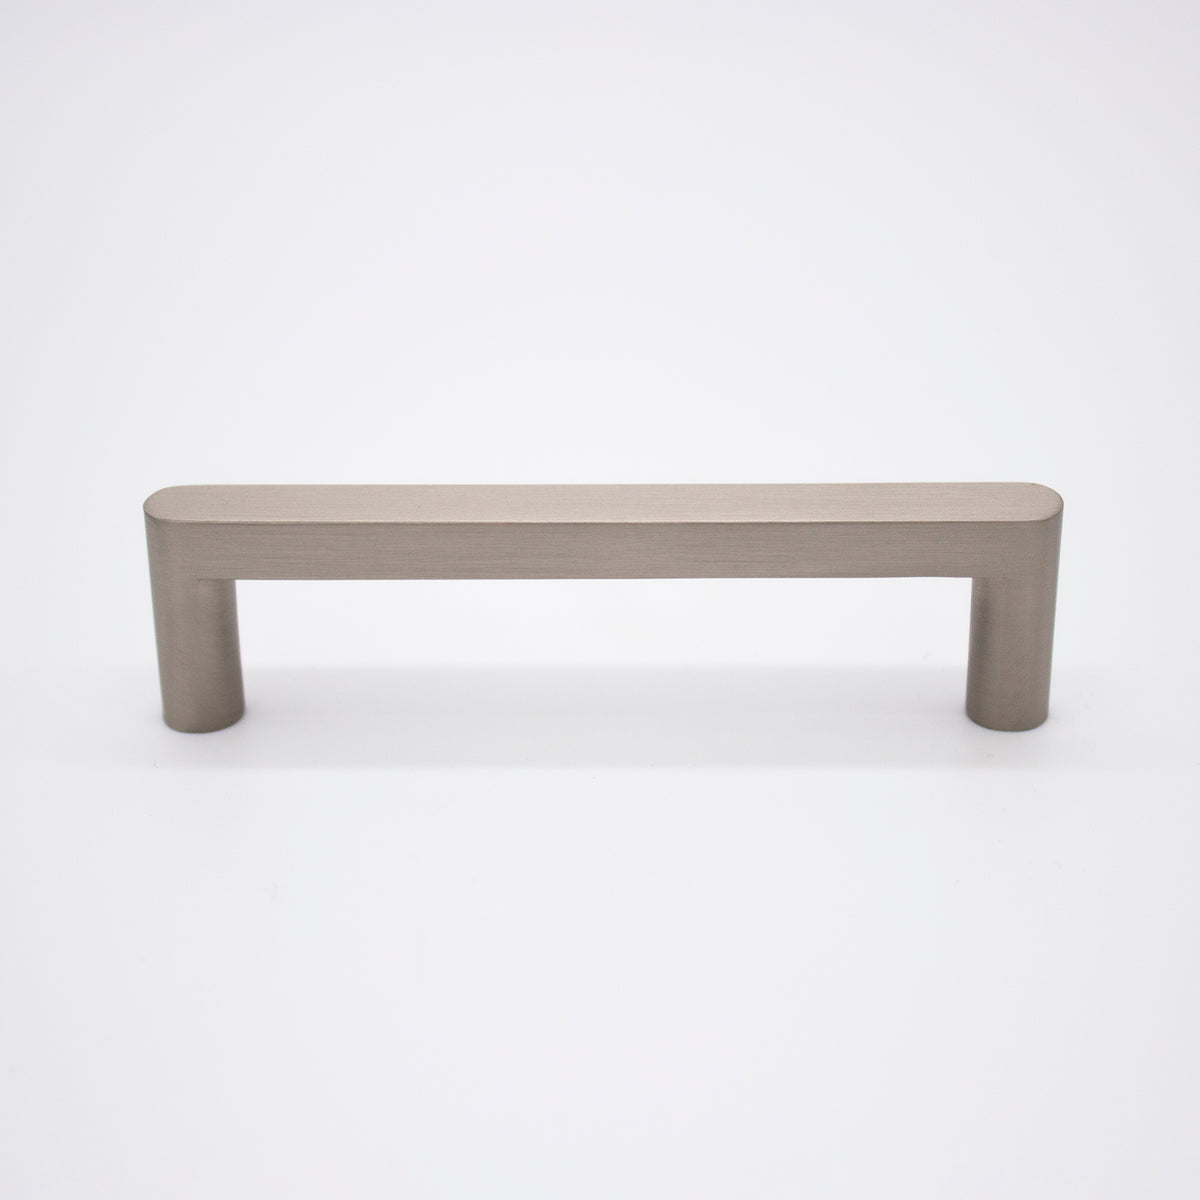 Brushed Nickel Straight Profile Cabinet Pull - Clio